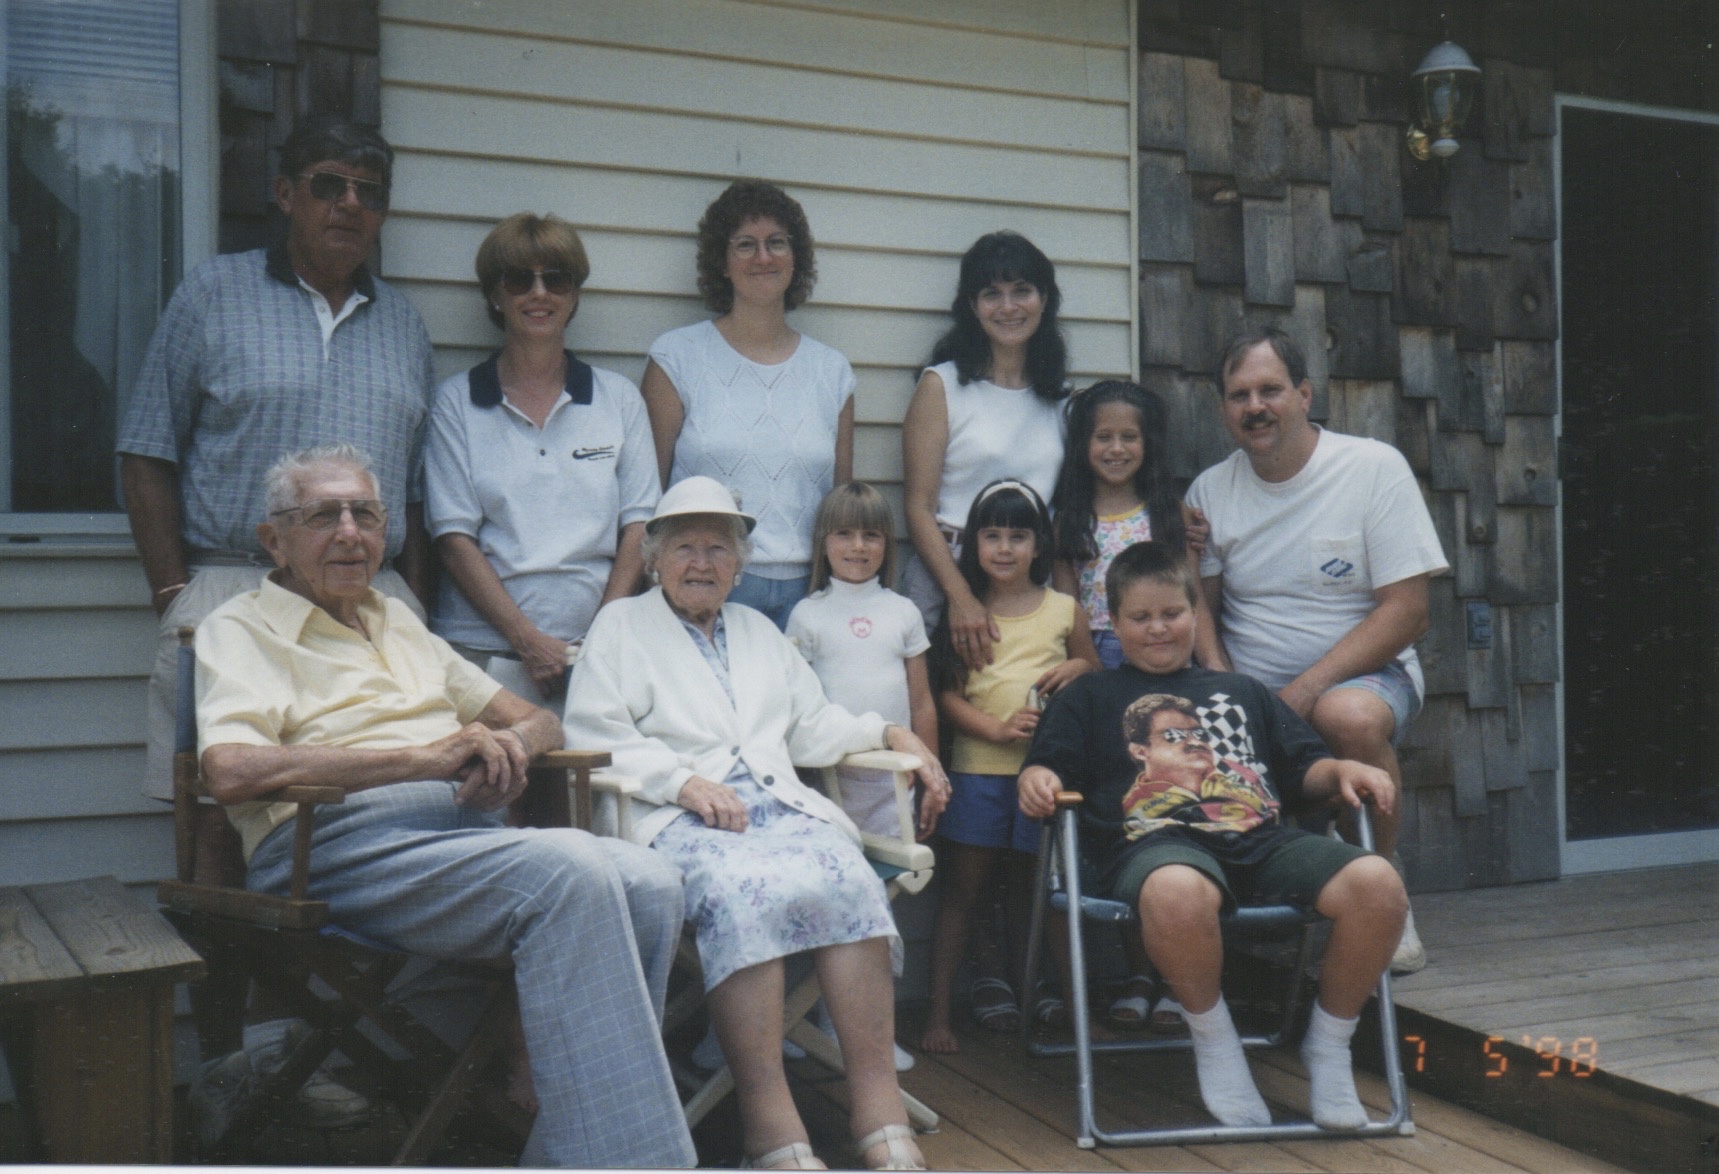 Some of the Golden Side of the Family - July 1998